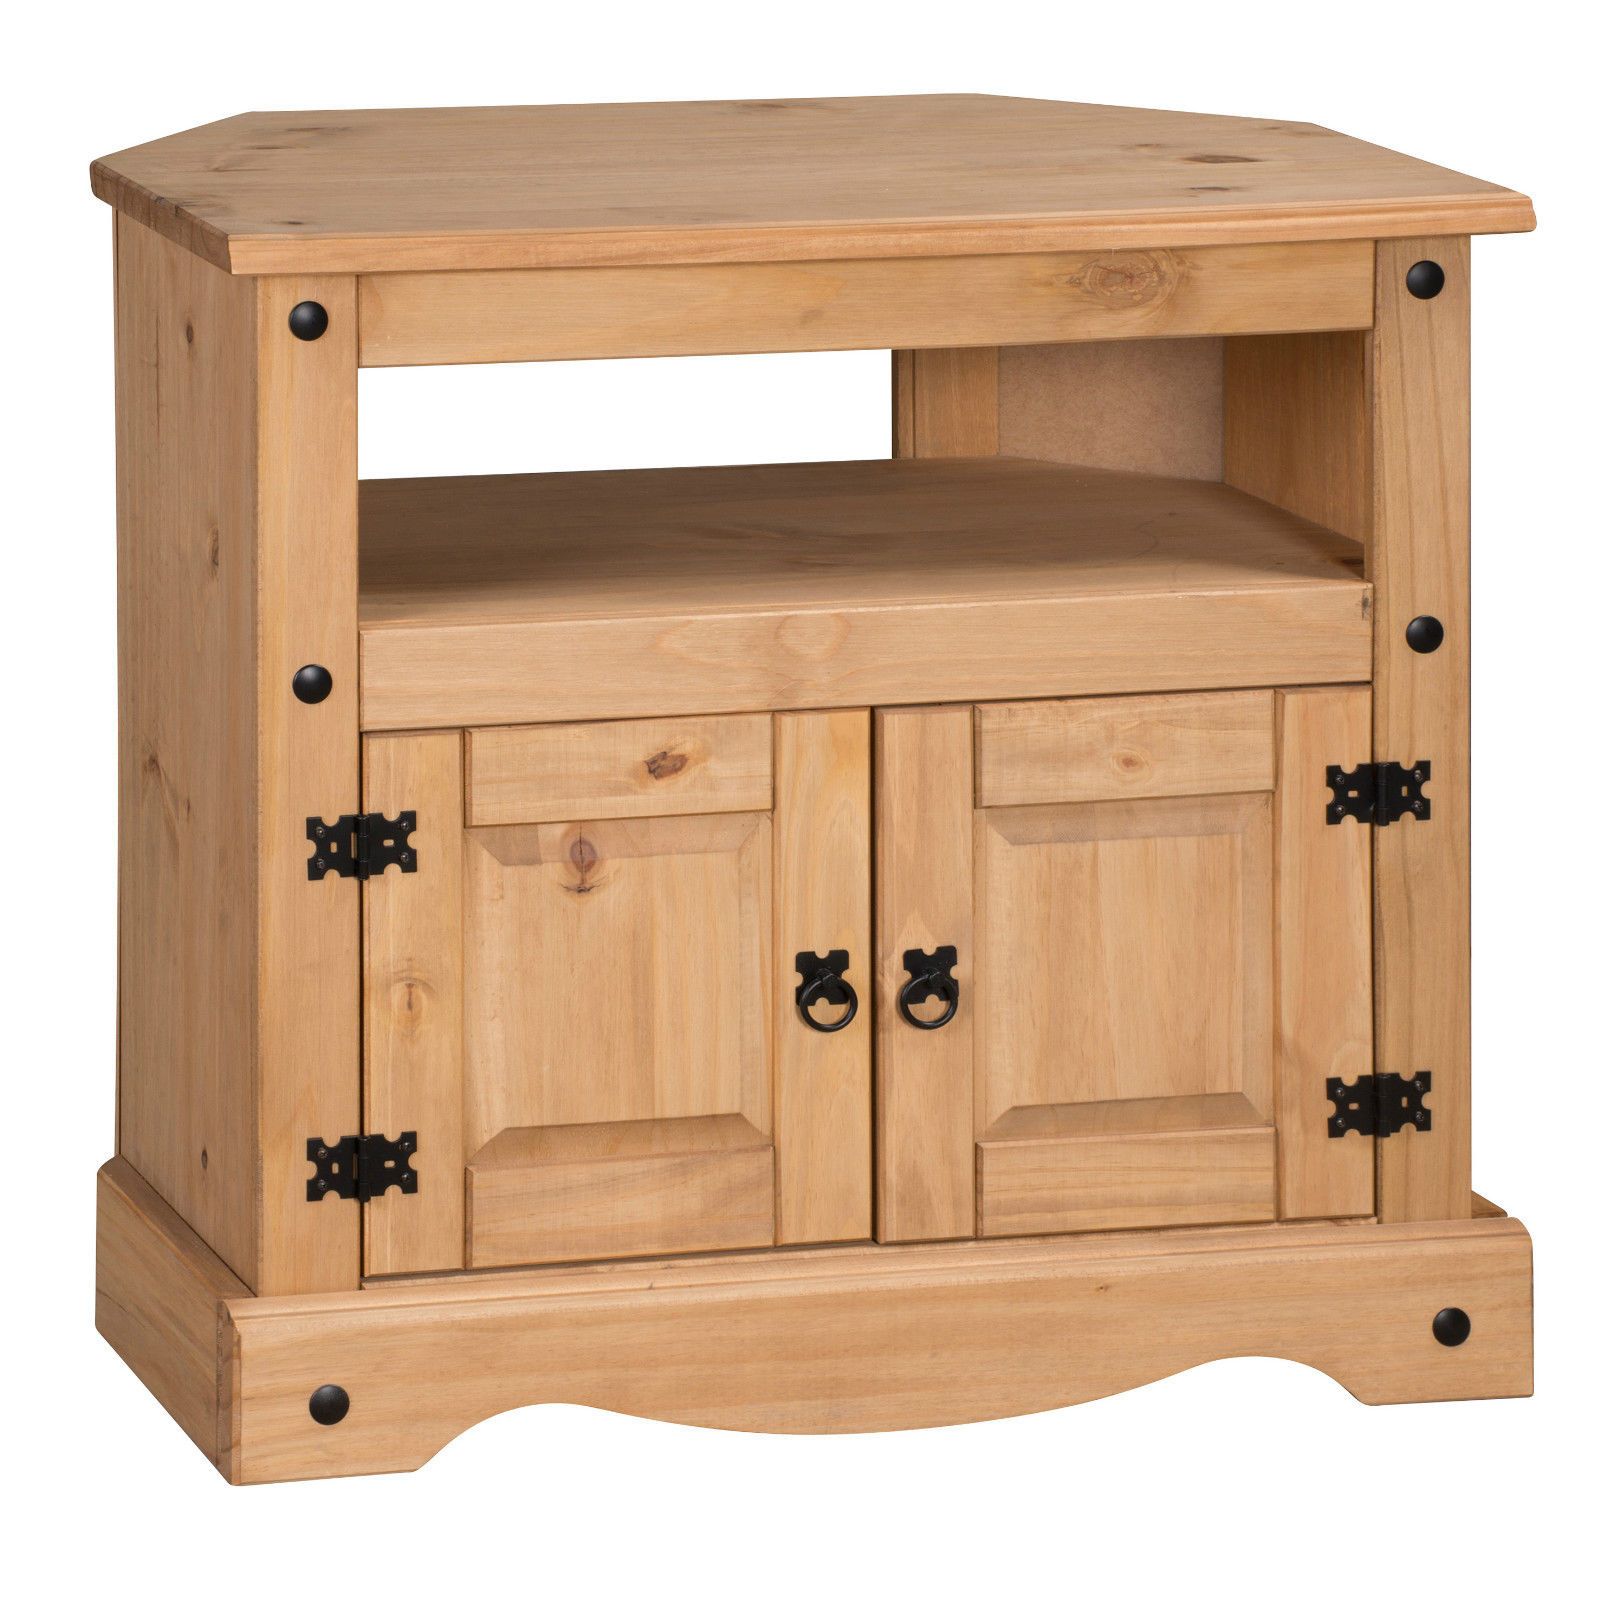 H4home Rustic Corner Tv Stand Solid Wood | H4home Furnitures Intended For Oak Corner Tv Stands (View 10 of 15)